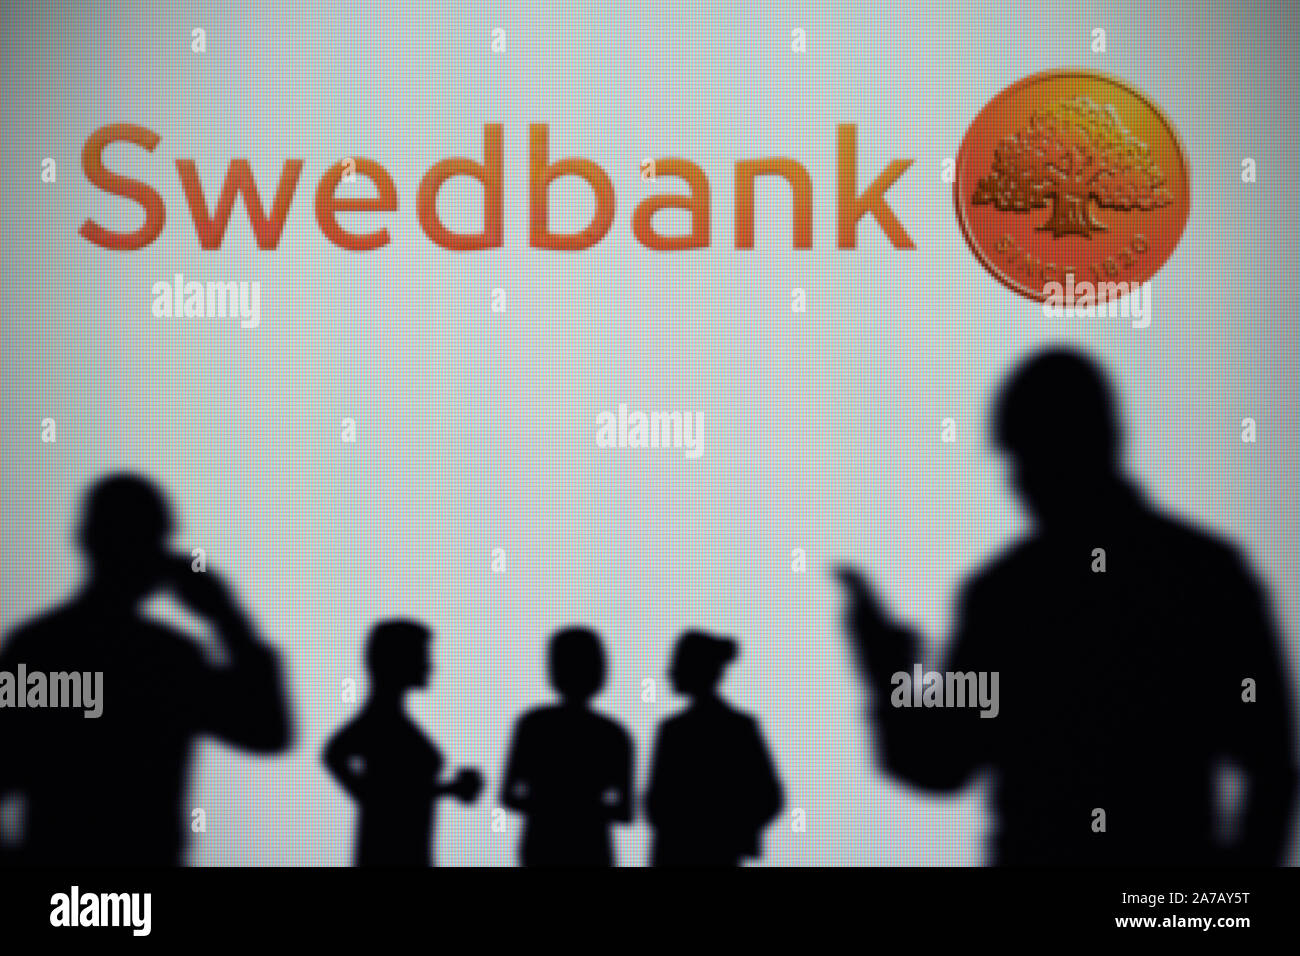 The Swedbank logo is seen on an LED screen in the background while a silhouetted person uses a smartphone (Editorial use only) Stock Photo